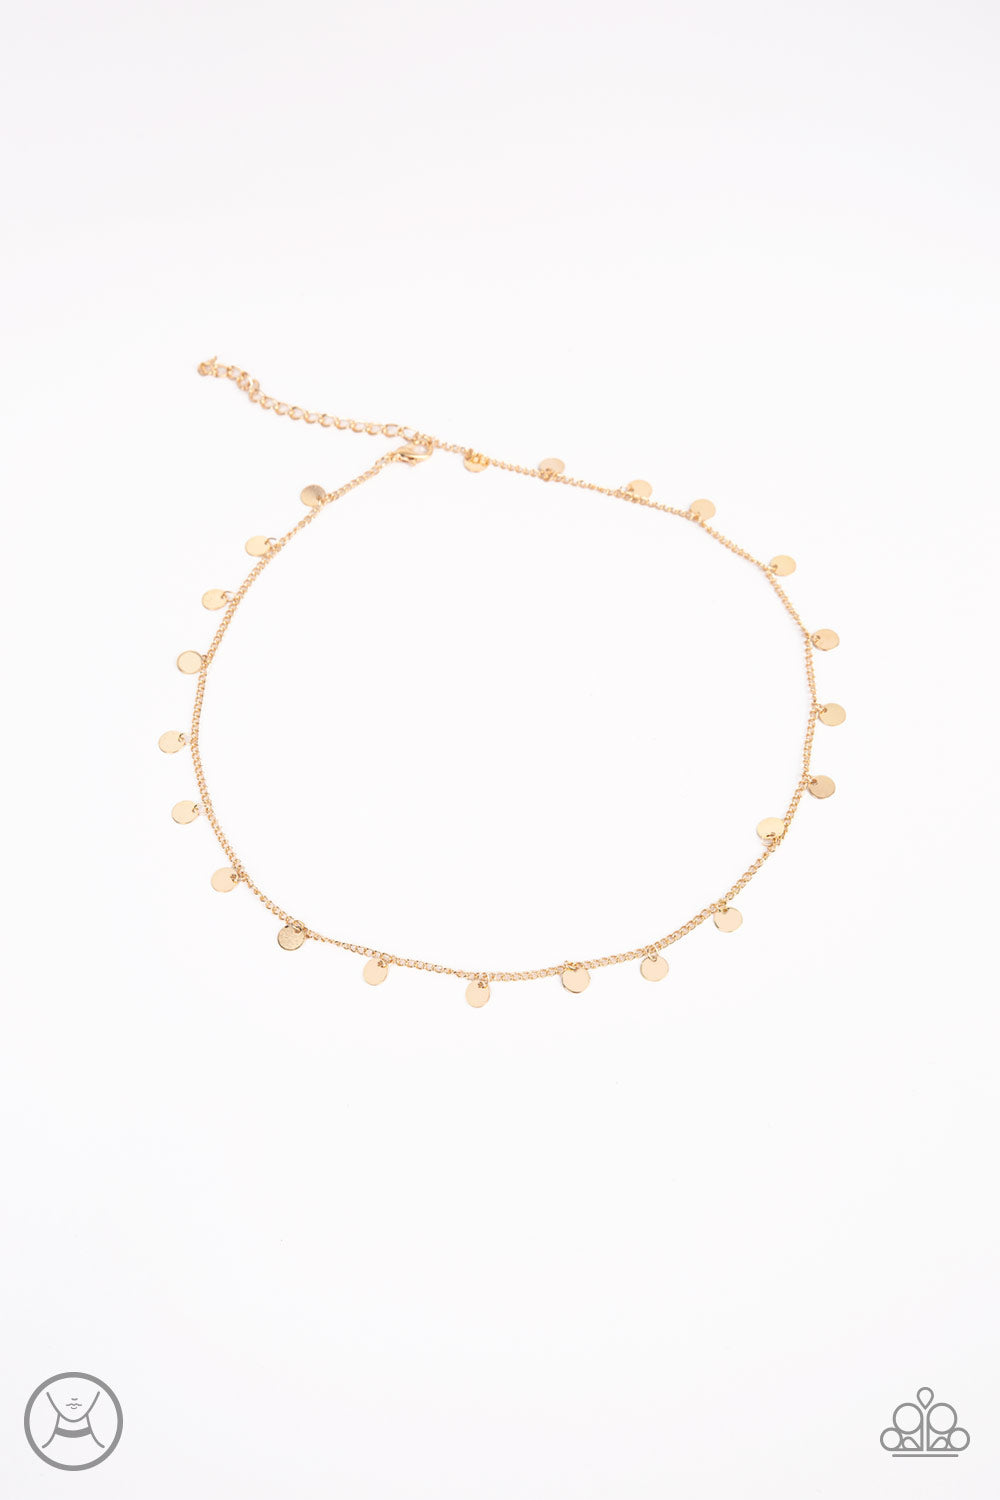 CHIME A Little Brighter - Gold Item #N647 Dainty gold discs dangle from a classic gold chain around the neck, creating a playful fringe. Features an adjustable clasp closure. All Paparazzi Accessories are lead free and nickel free!  Sold as one individual choker necklace. Includes one pair of matching earrings.